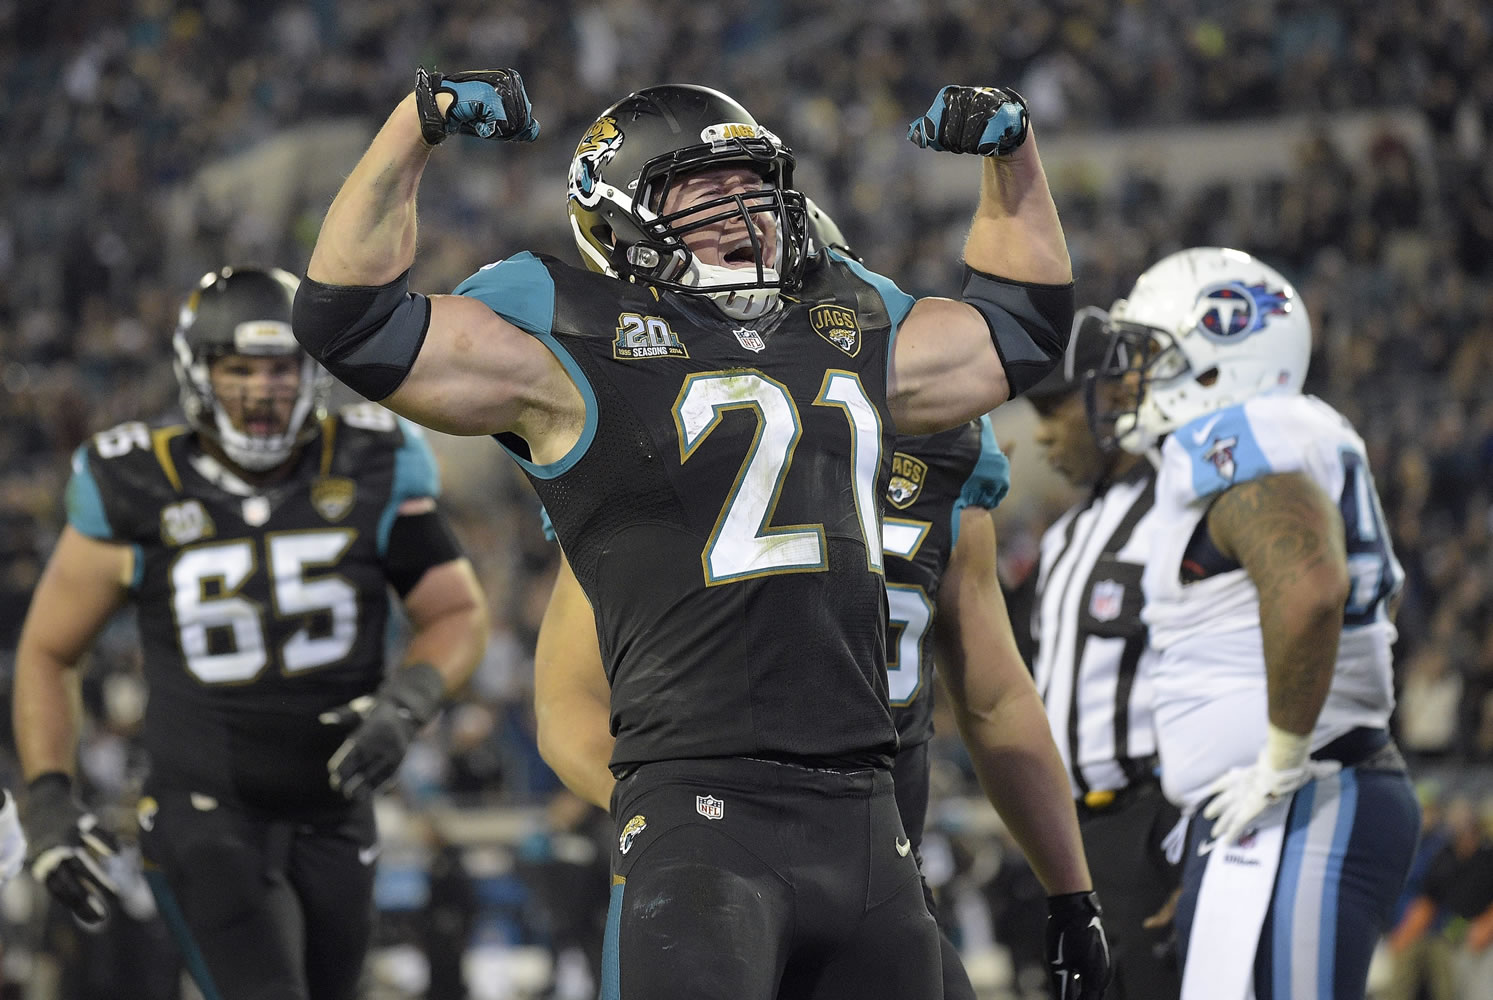 Jacksonville Jaguars running back Toby Gerhart (21) reacts after his 1-yard touchdown run against the Tennessee Titans during the third quarter Thursday, Dec. 18, 2014, in Jacksonville, Fla. (AP Photo/Phelan M.